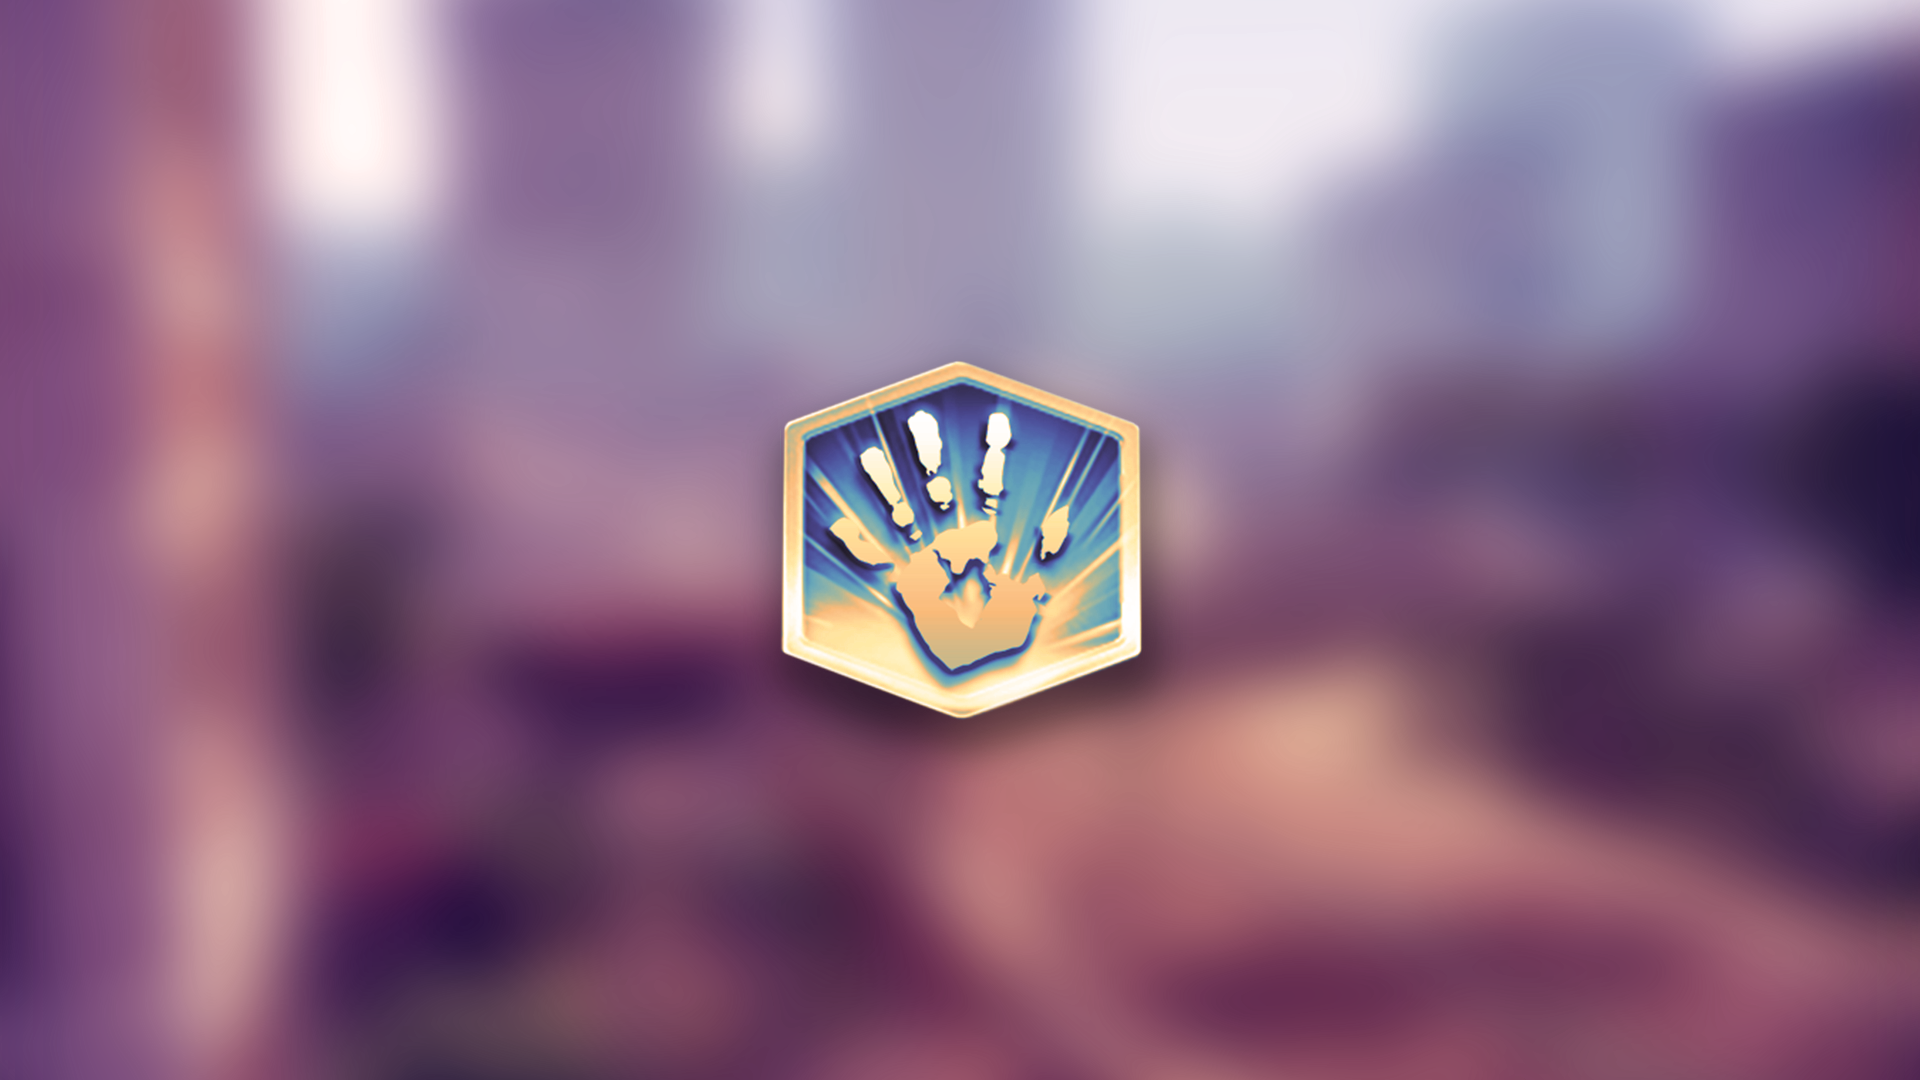 Icon for 5 Fingers Would Be Enough